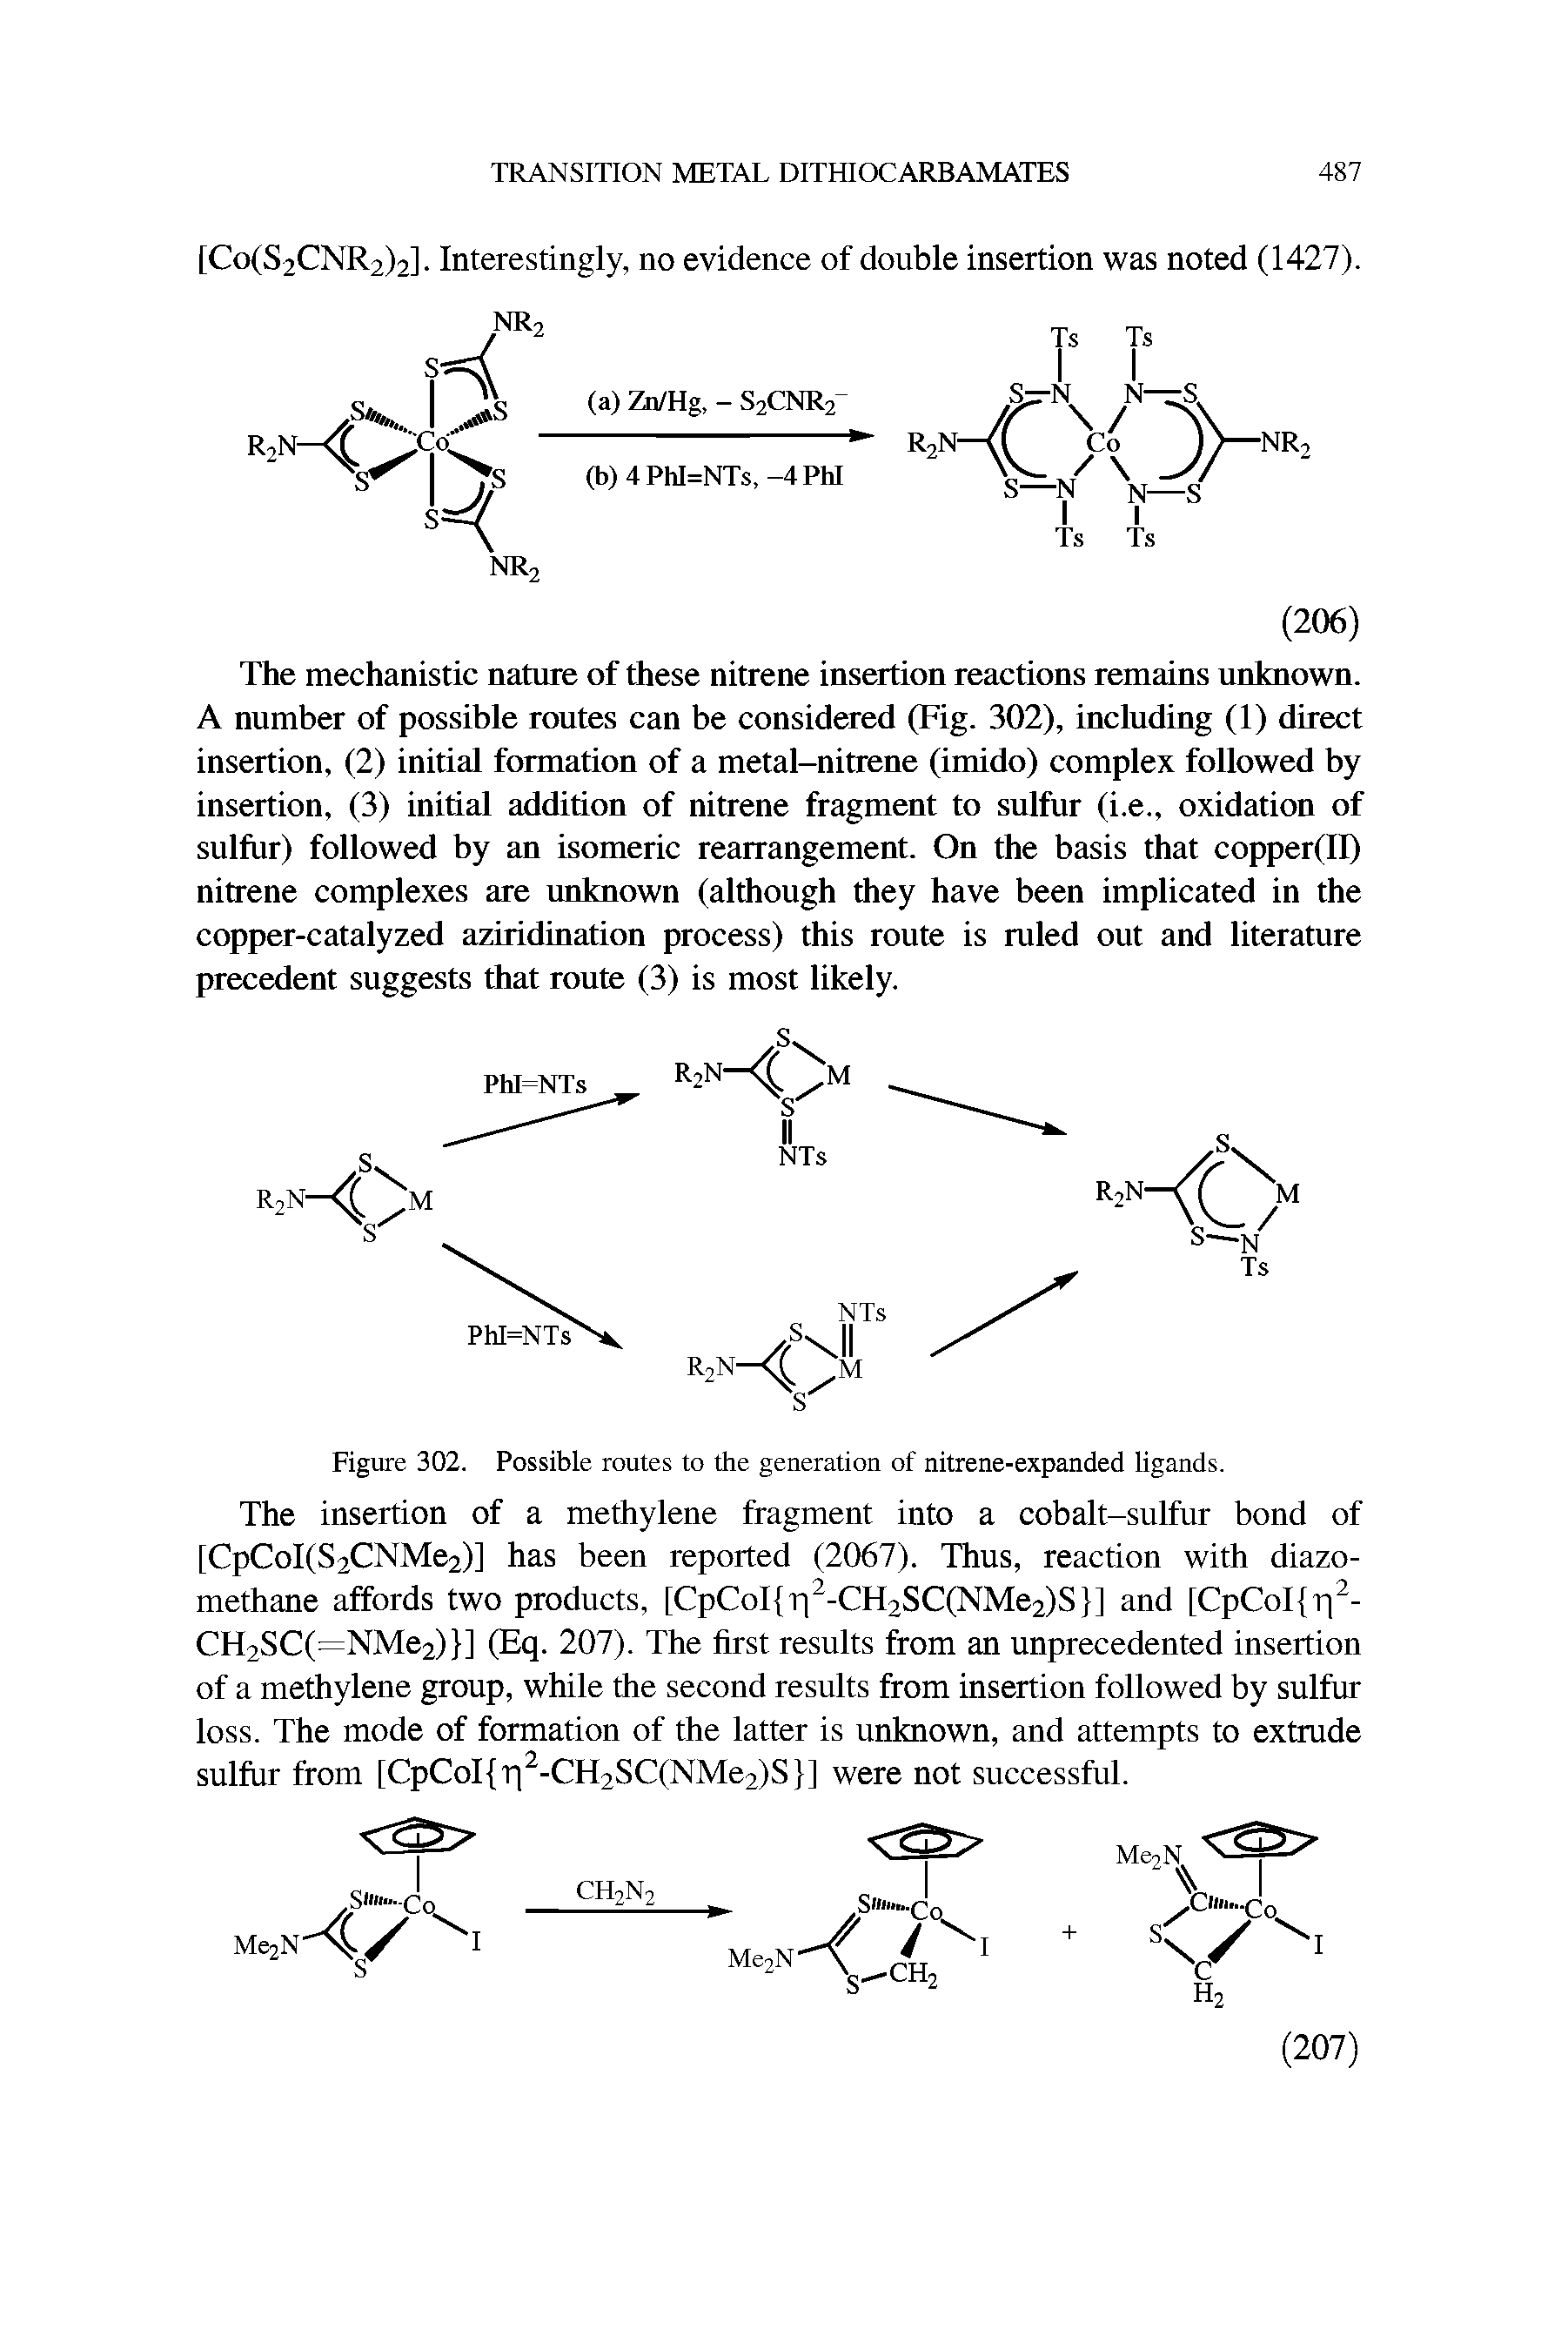 Figure 302. Possible routes to the generation of nitrene-expanded ligands.